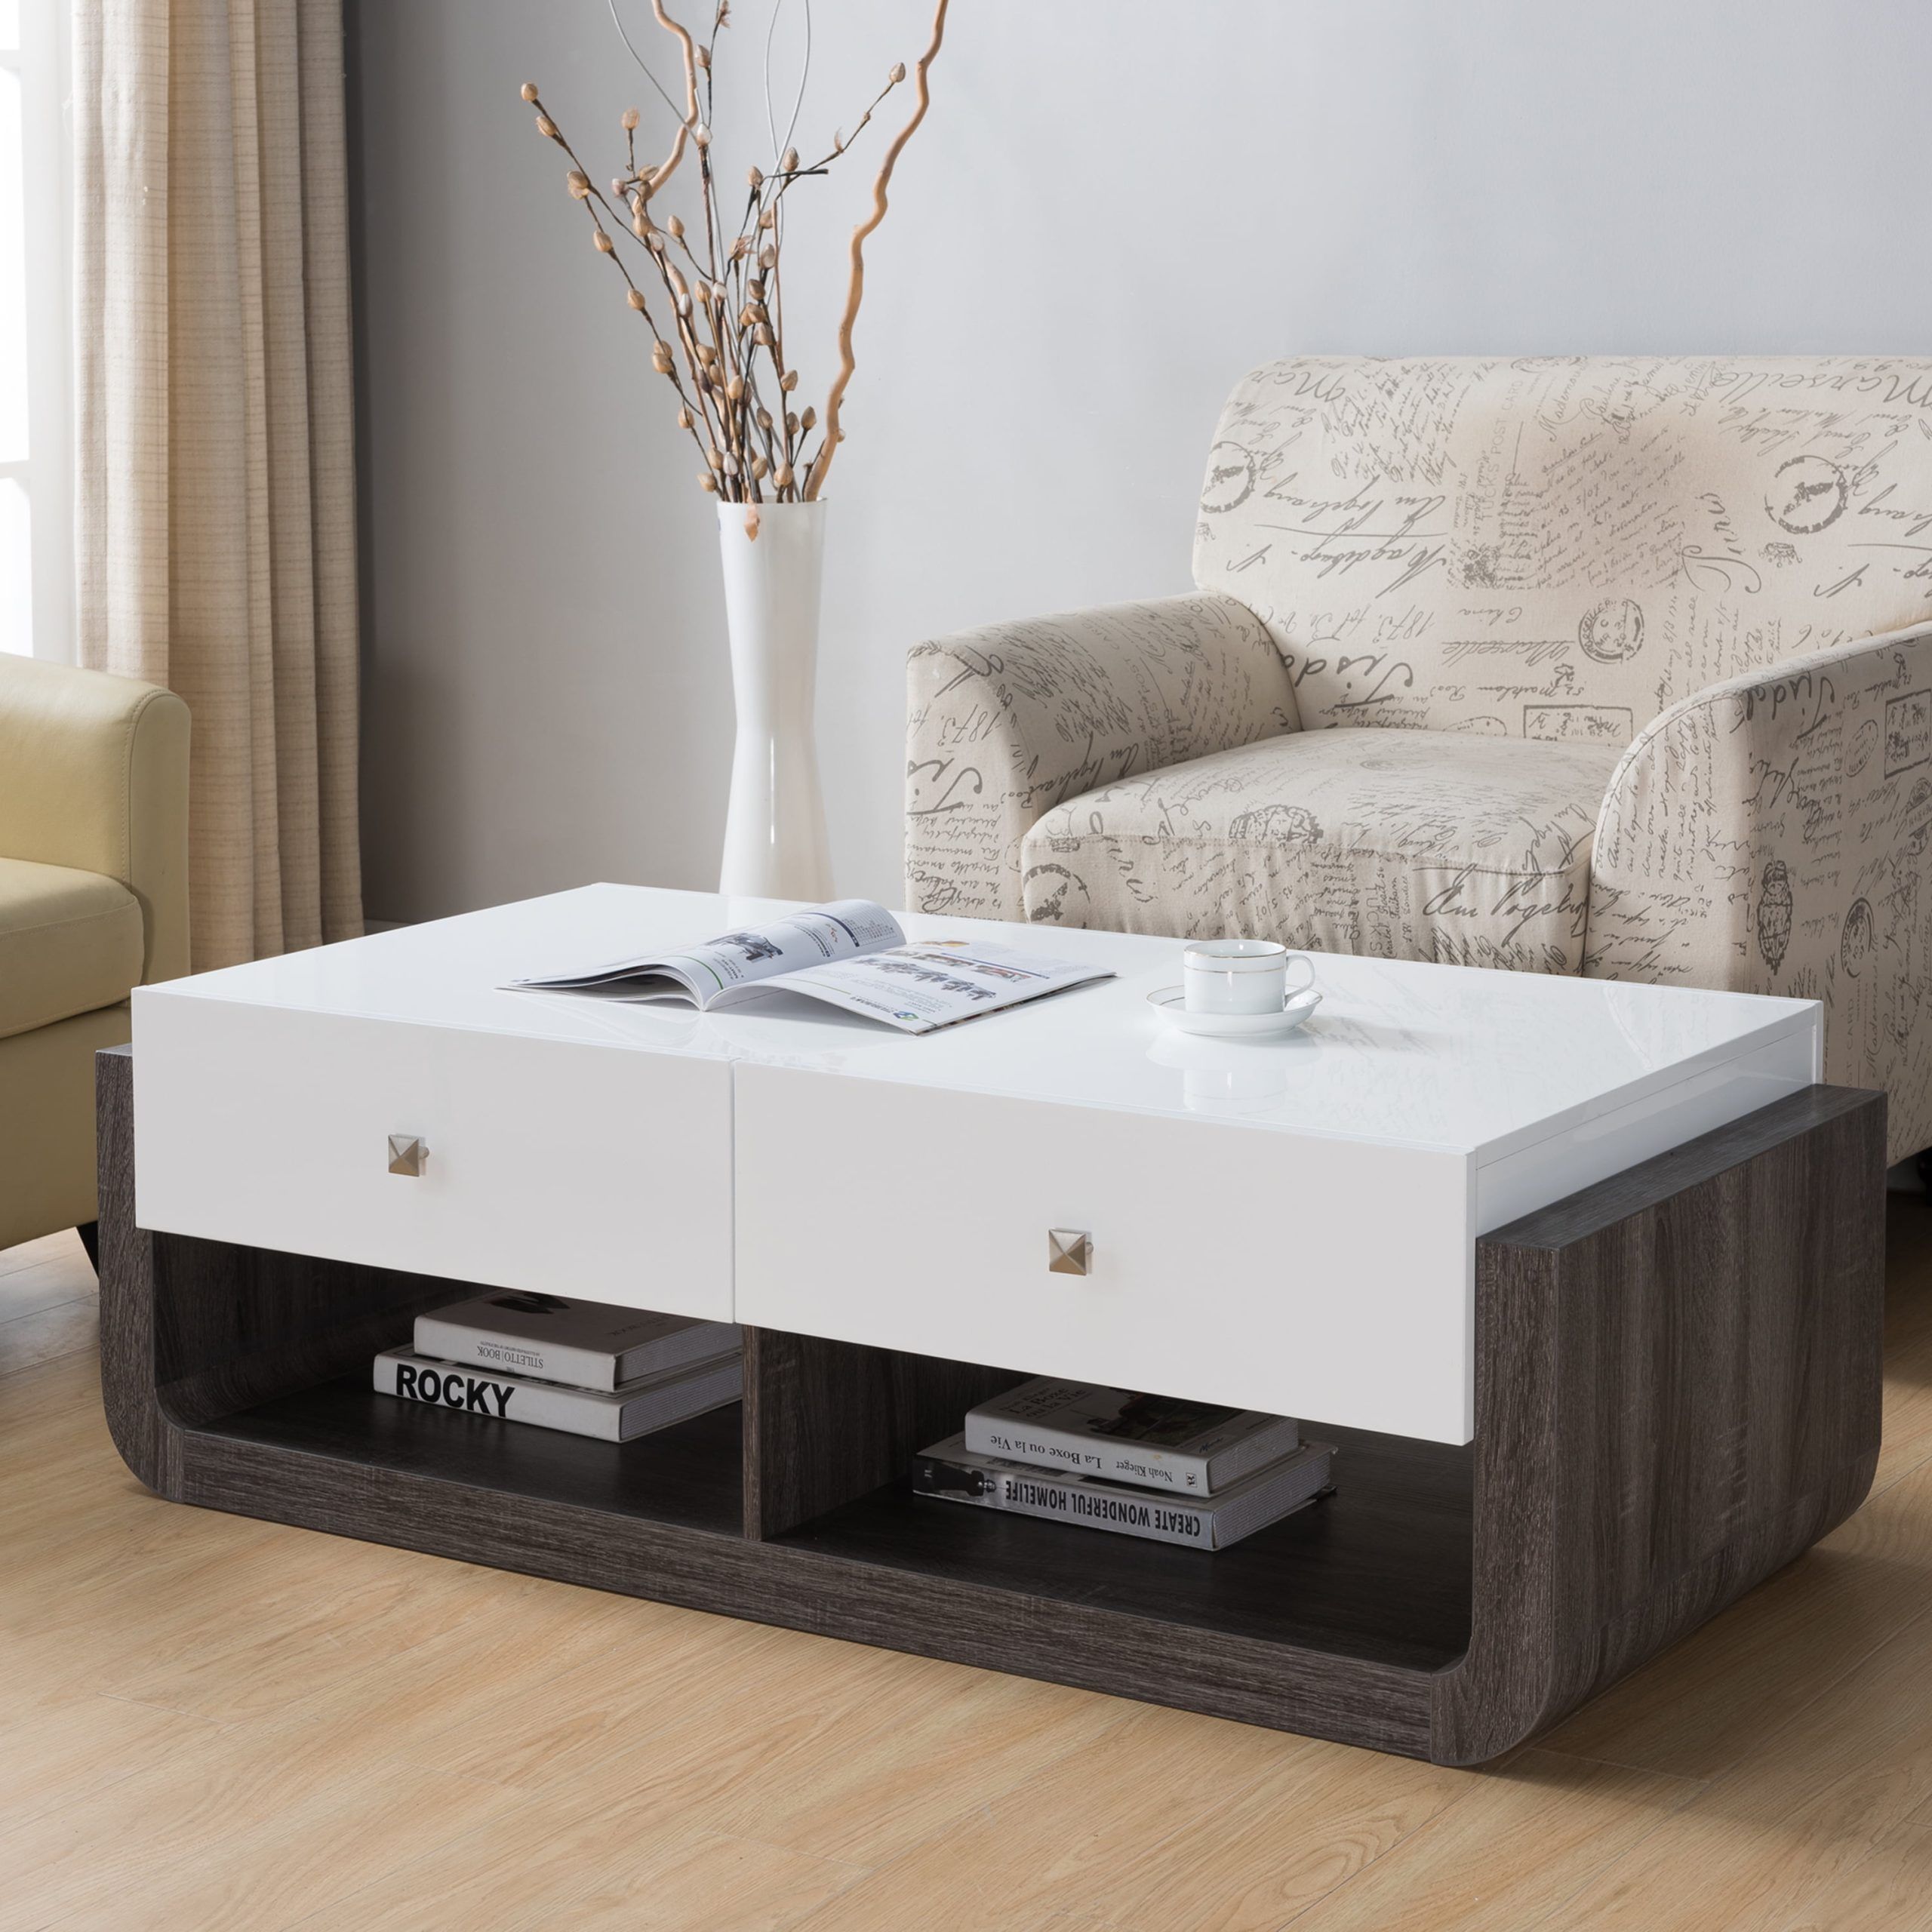 Furniture Of America Bealina Contemporary Multi Storage Coffee Table Throughout Modern Coffee Tables With Hidden Storage Compartments (Gallery 18 of 20)